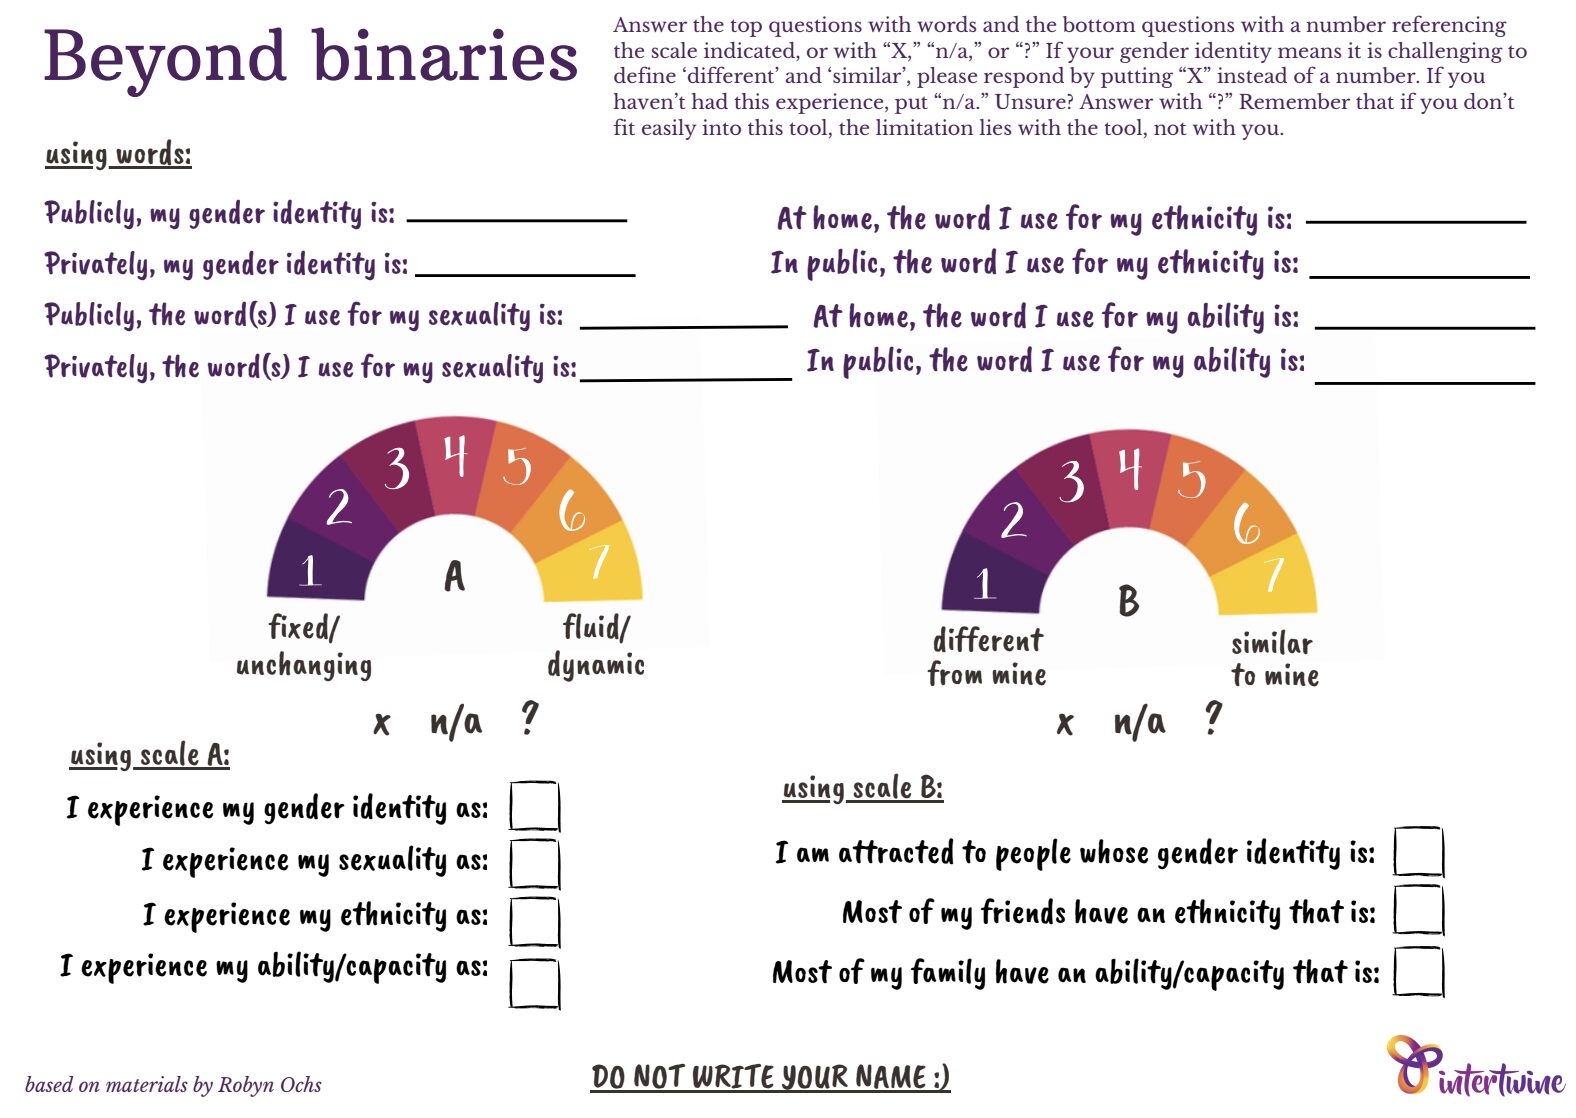 A screenshot of a worksheet with colourful scales on it and questions about ethnicity, sexuality, disability and gender